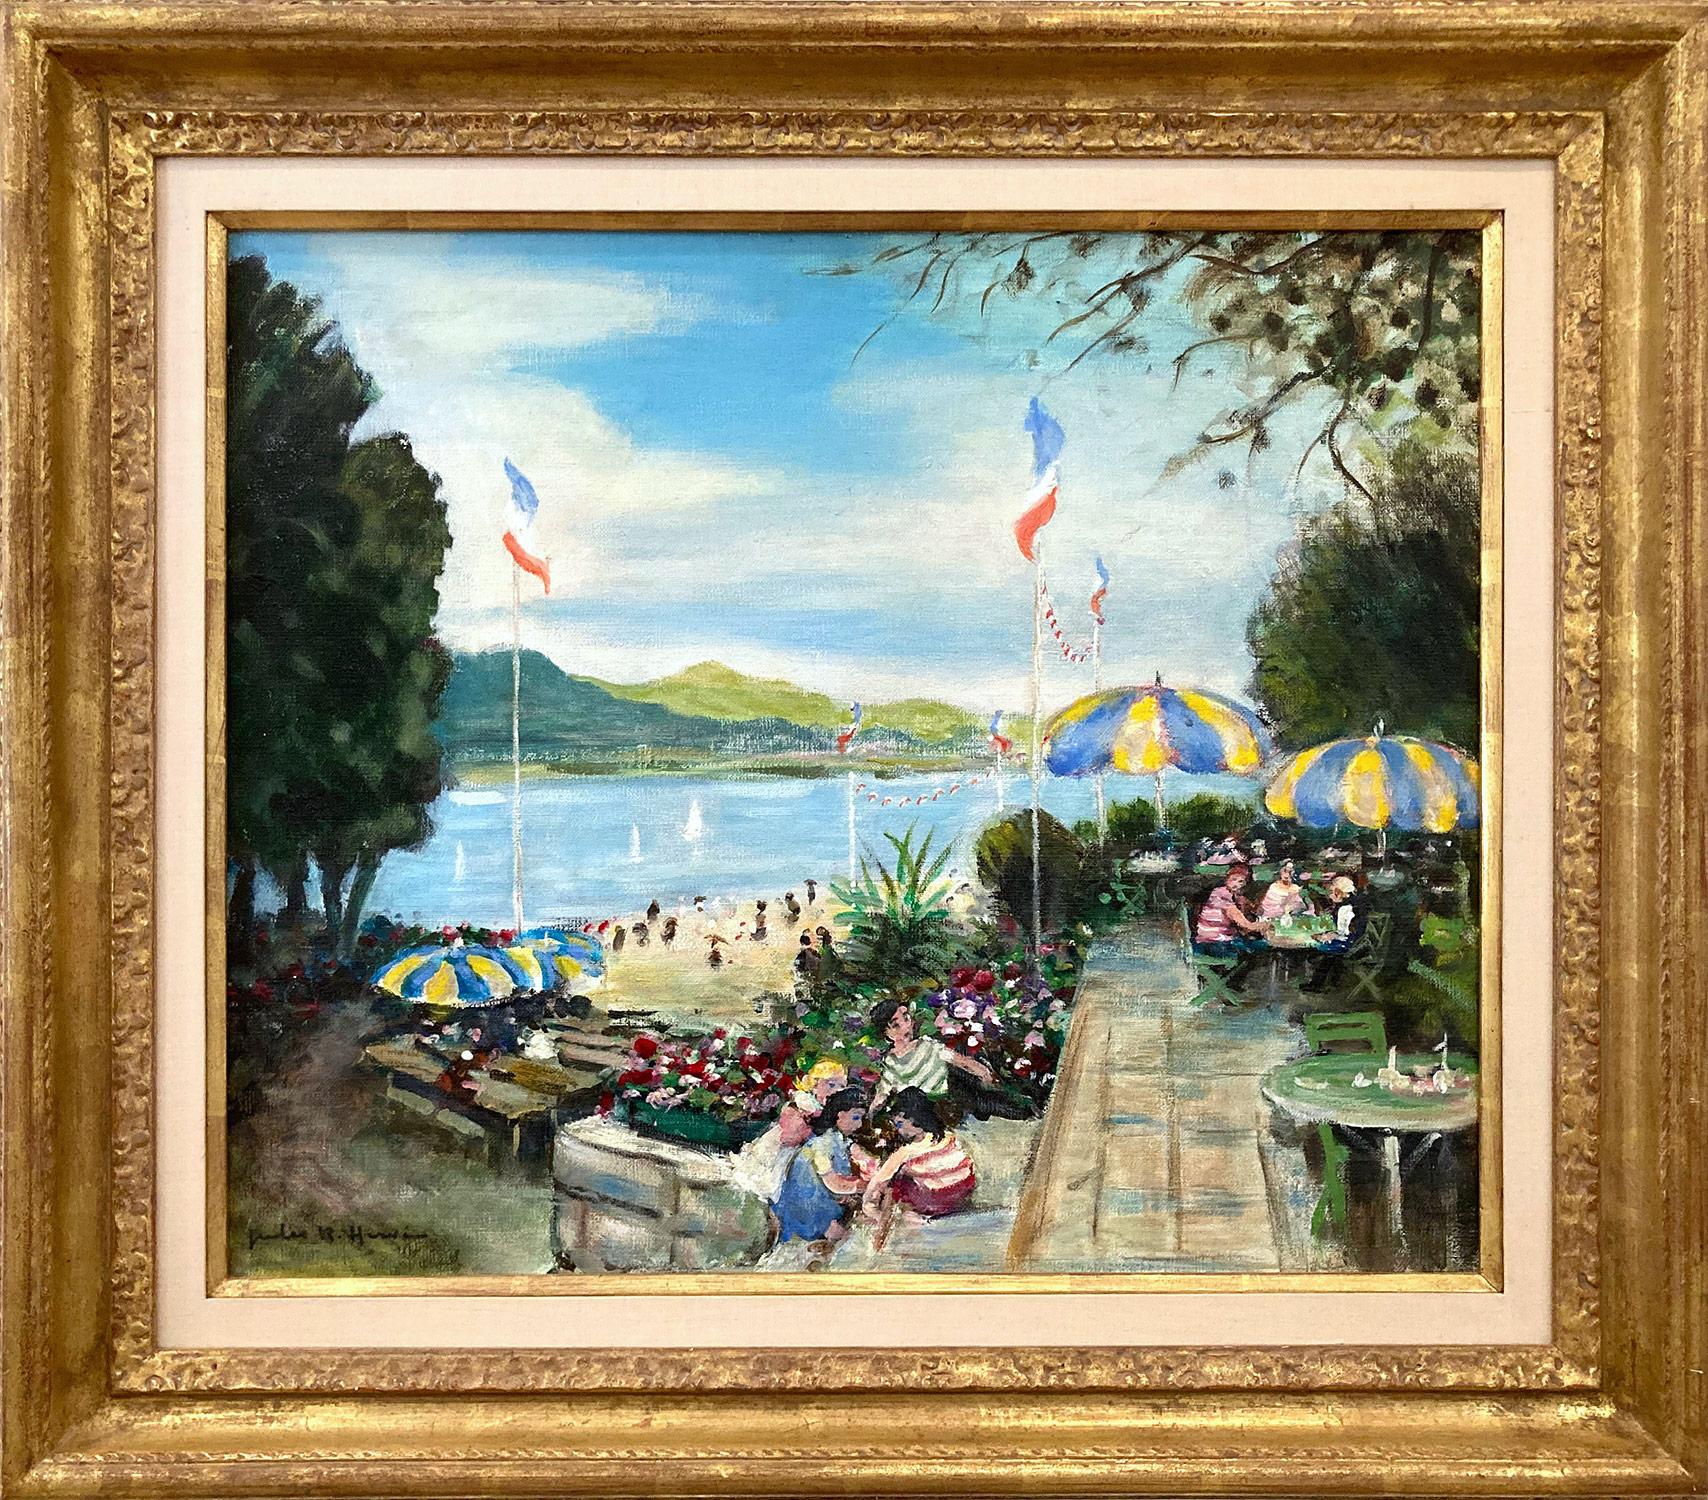 Jules René Hervé Figurative Painting - "Cafe by the Beach in the Summer" Impressionist Oil Painting Canvas with Figures